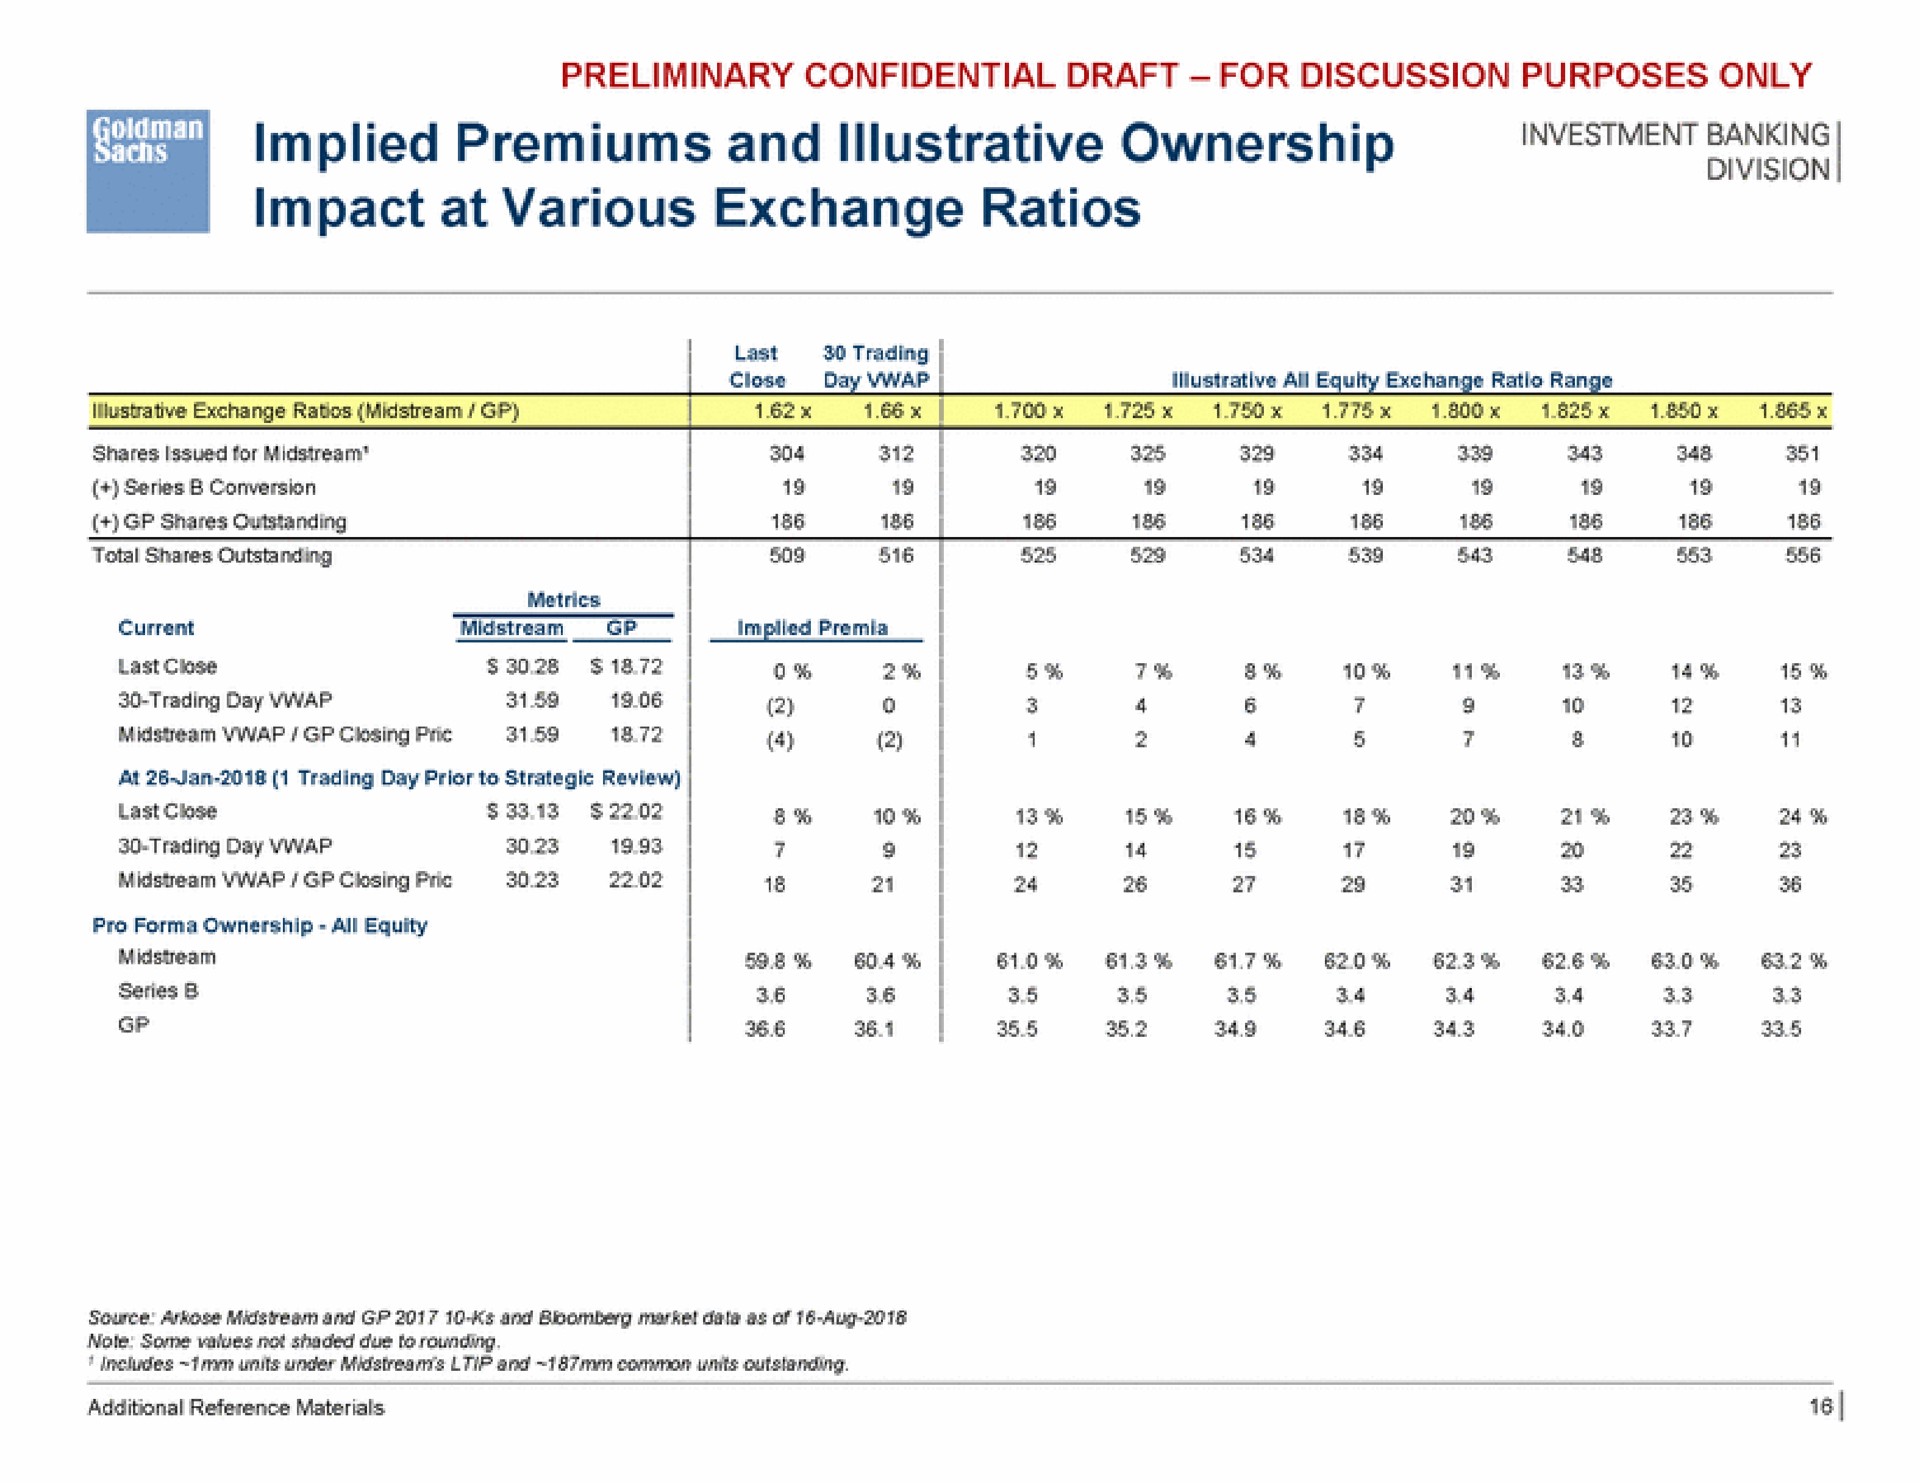 a ces implied premiums and illustrative ownership impact at various exchange ratios | Goldman Sachs